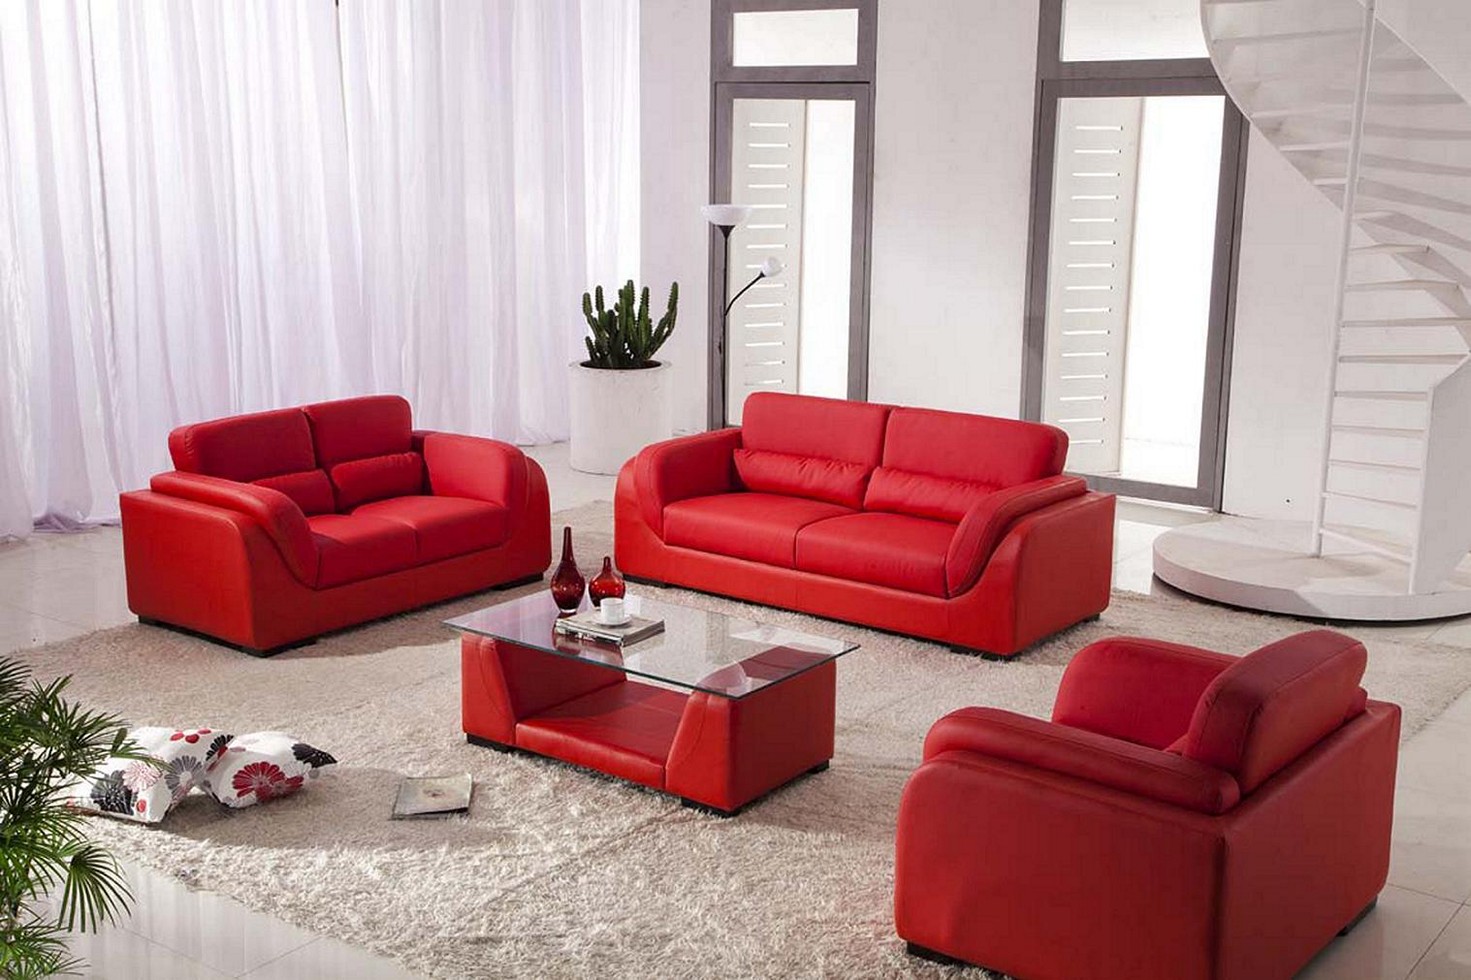 living room design red couch photo - 3